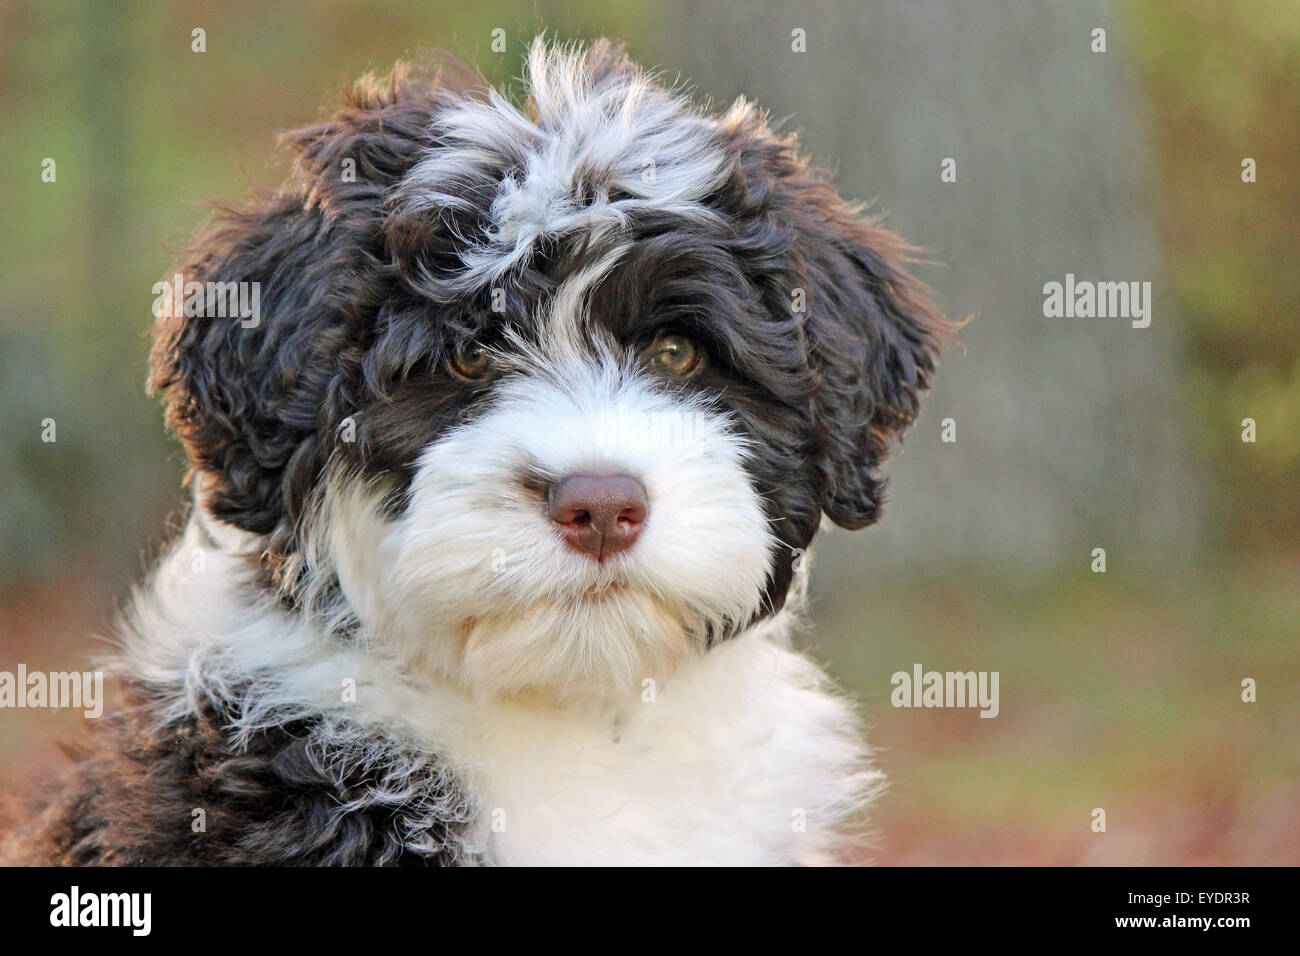 A Young Brown And White Portuguese Water Dog Puppy With Irish Marking Stock Photo Alamy